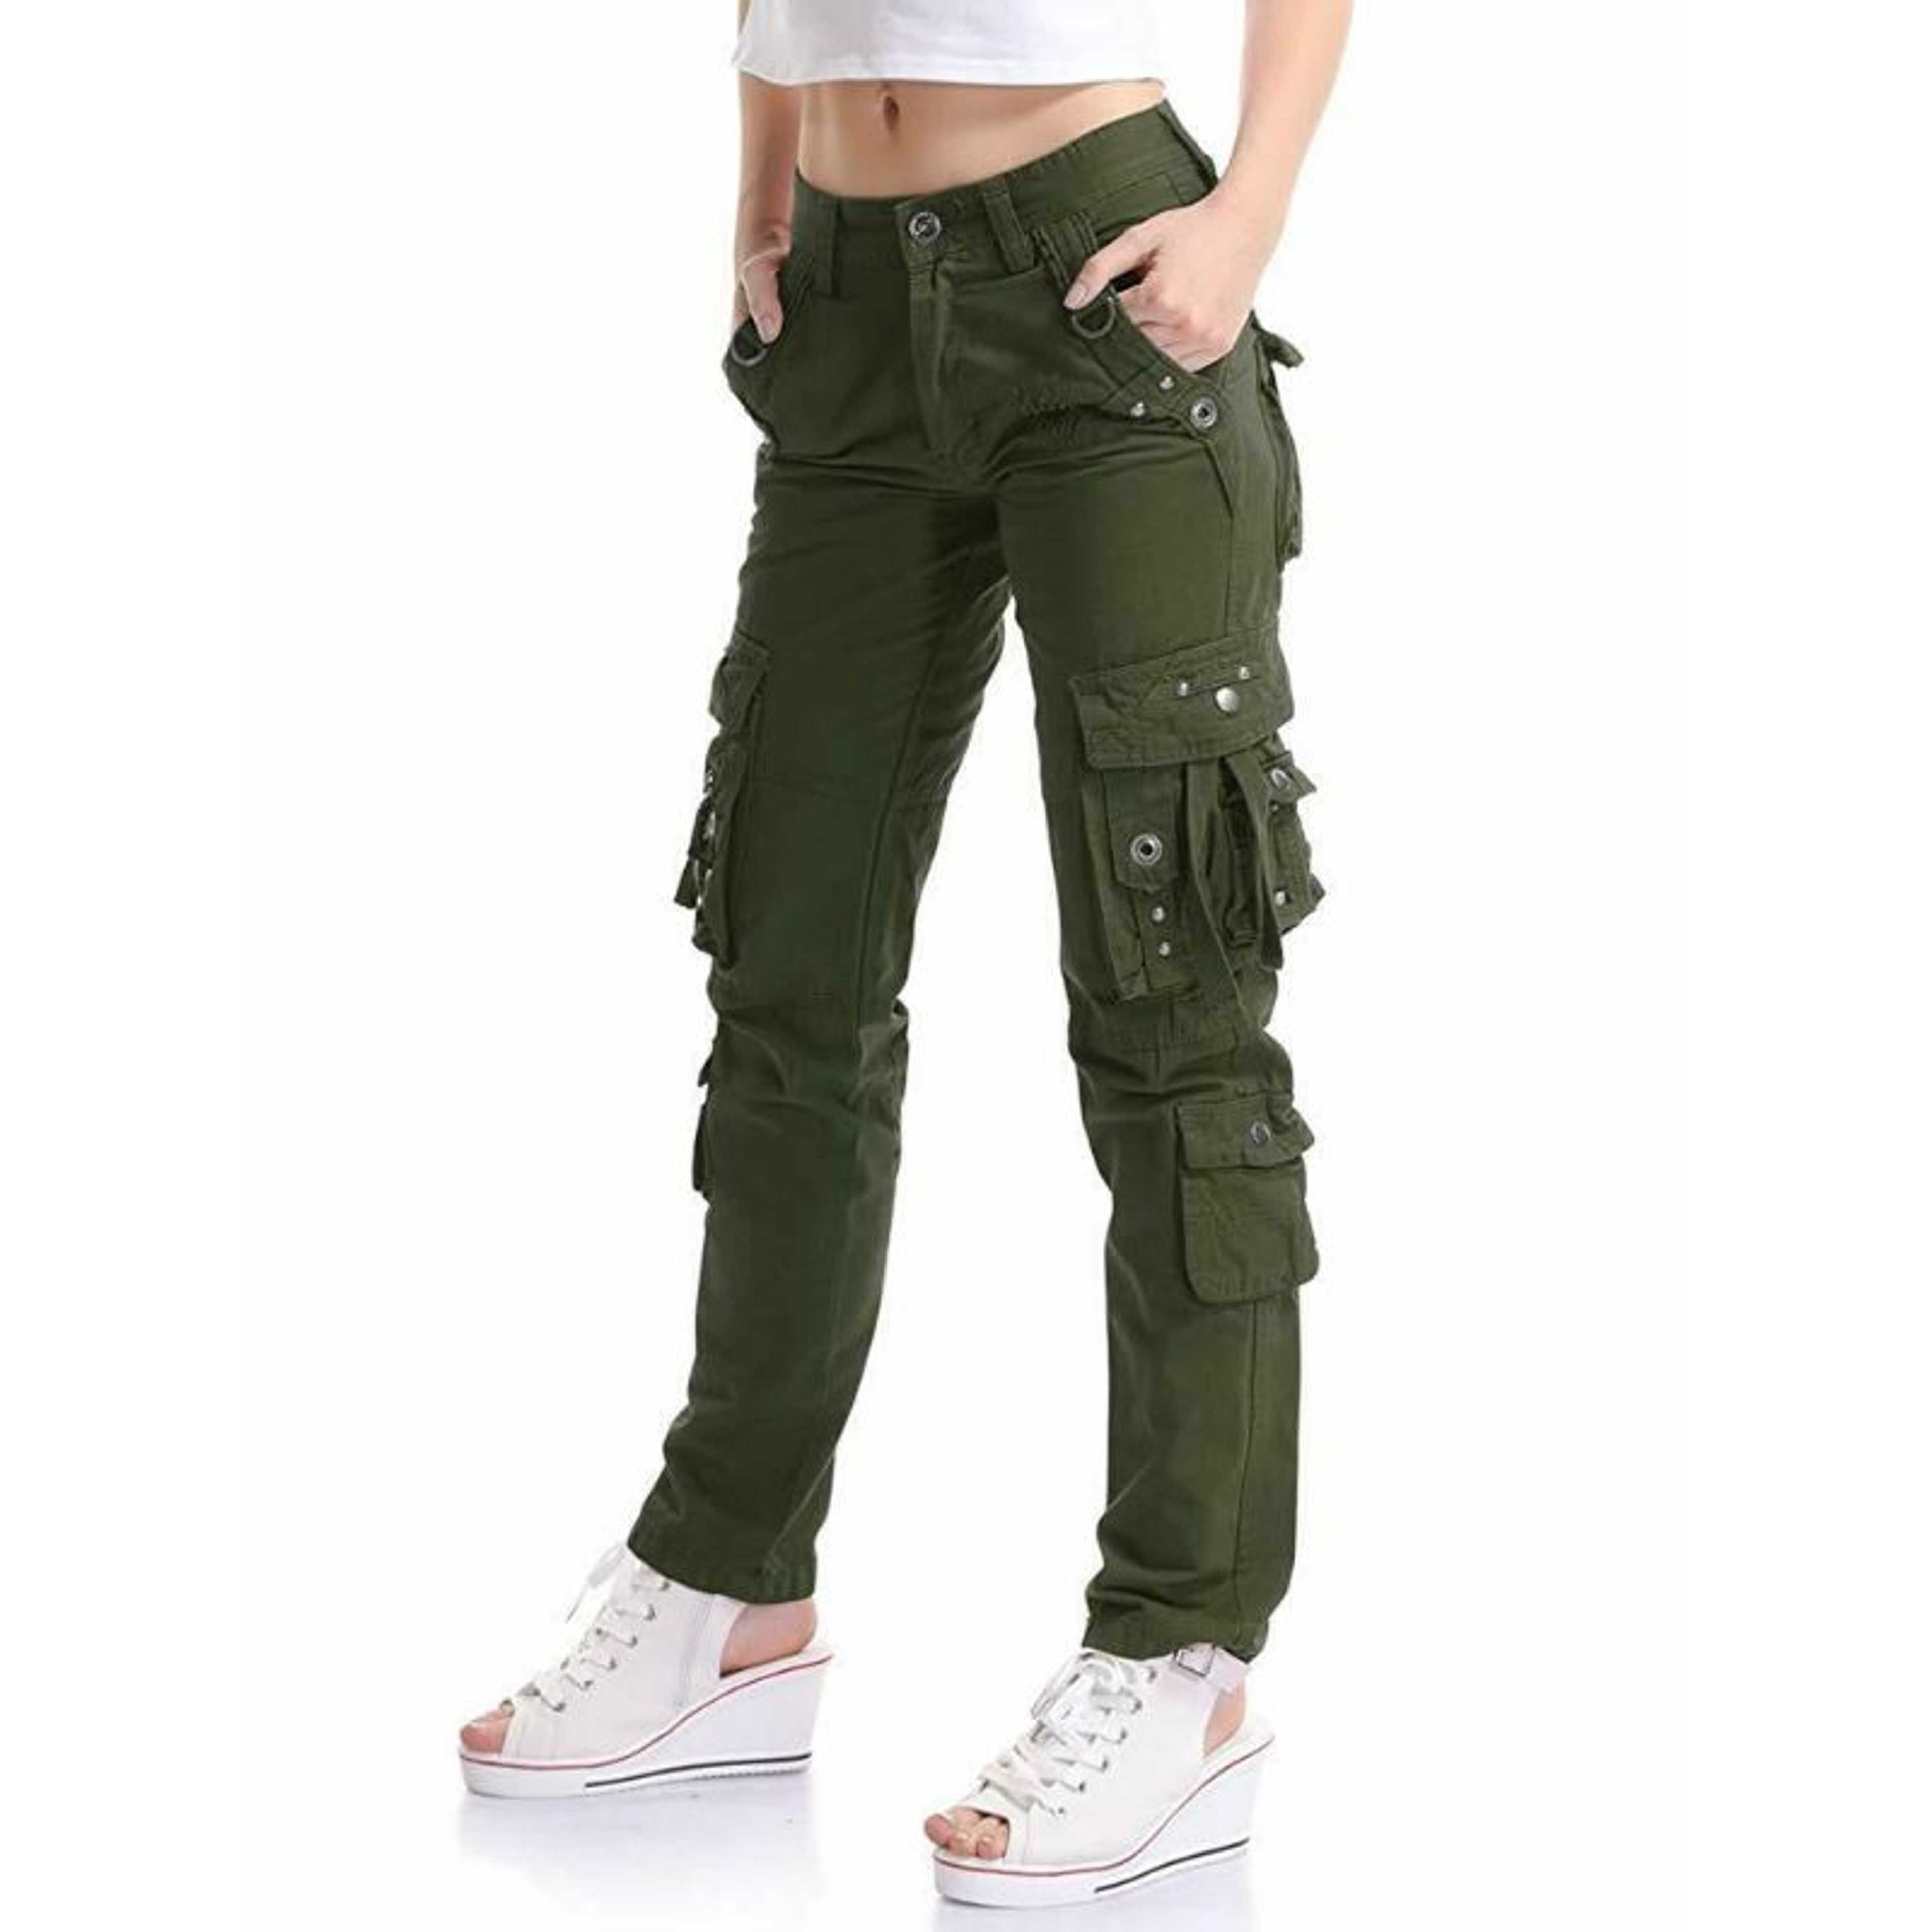 Olive Color Rubahas Womens Cargo Trousers Ladies Trousers Jeans Pants